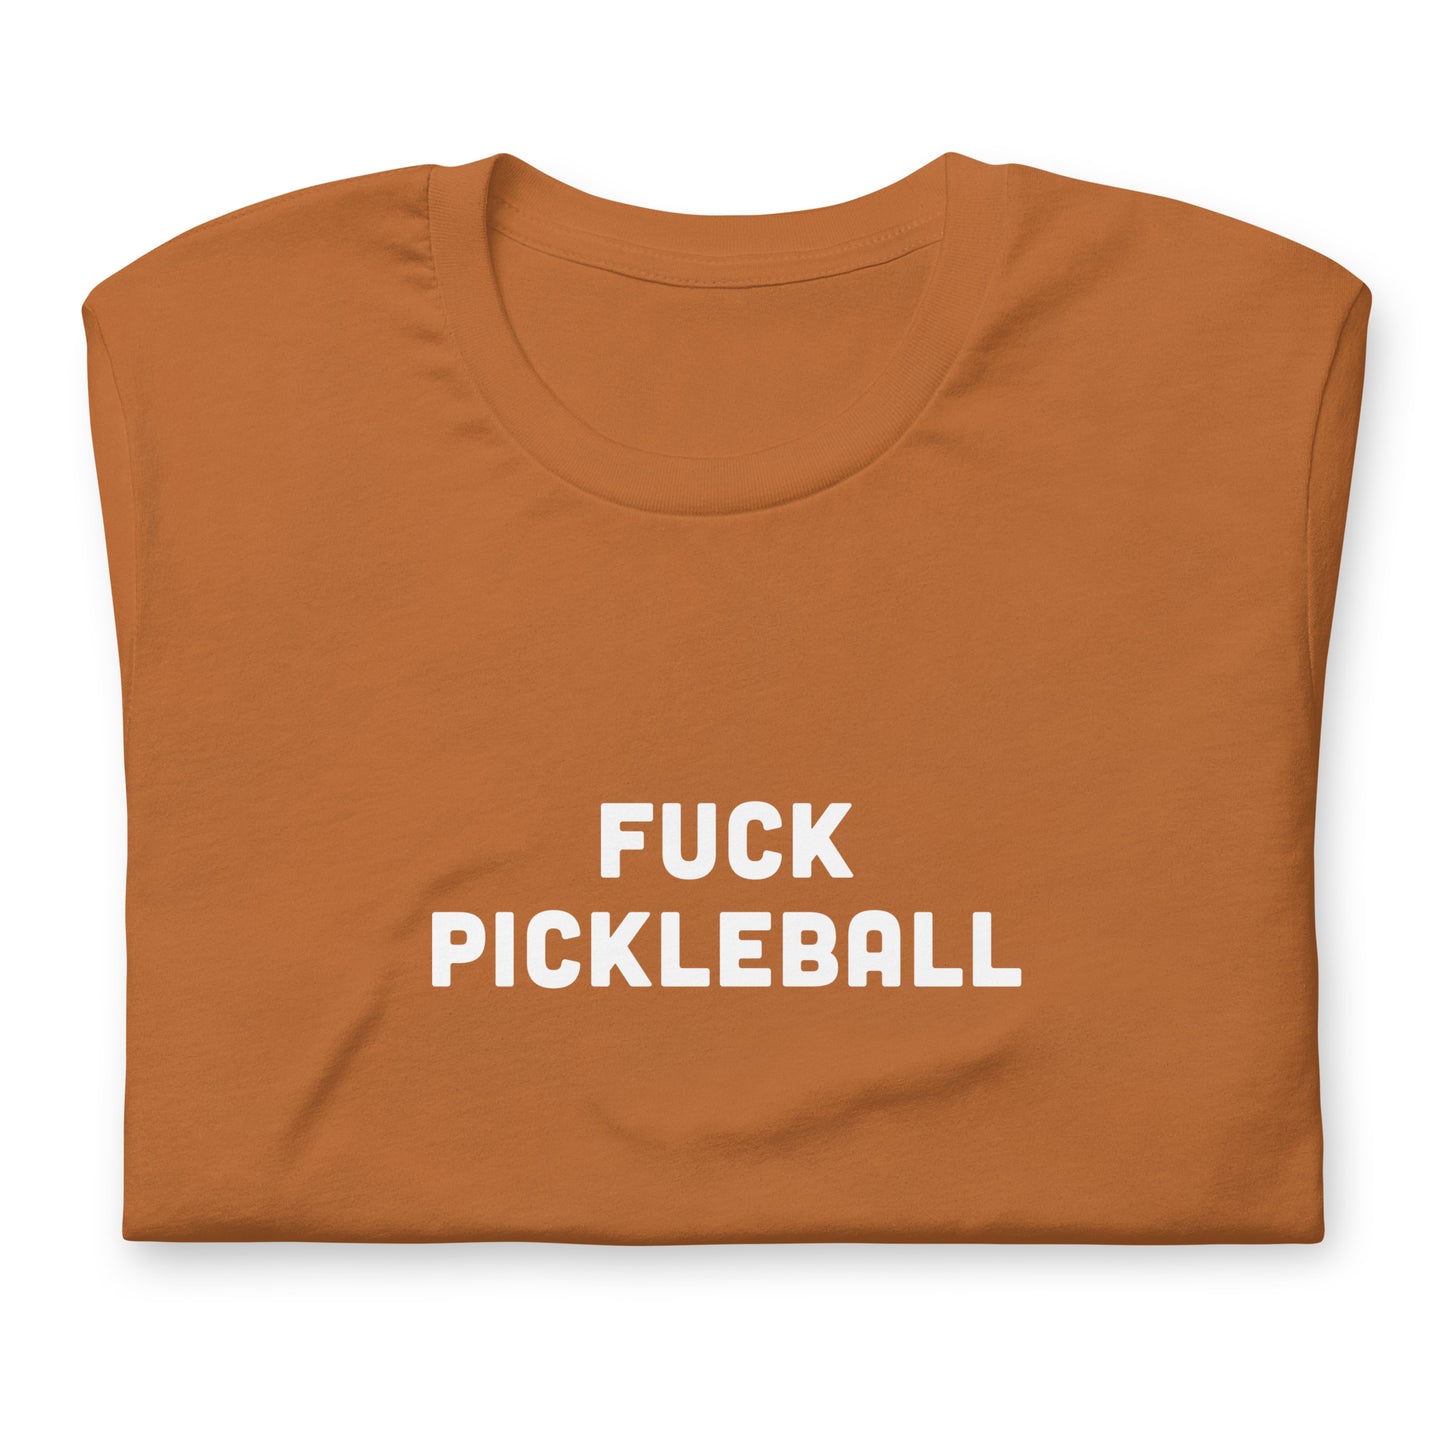 Fuck Pickleball T-Shirt Size L Color Navy